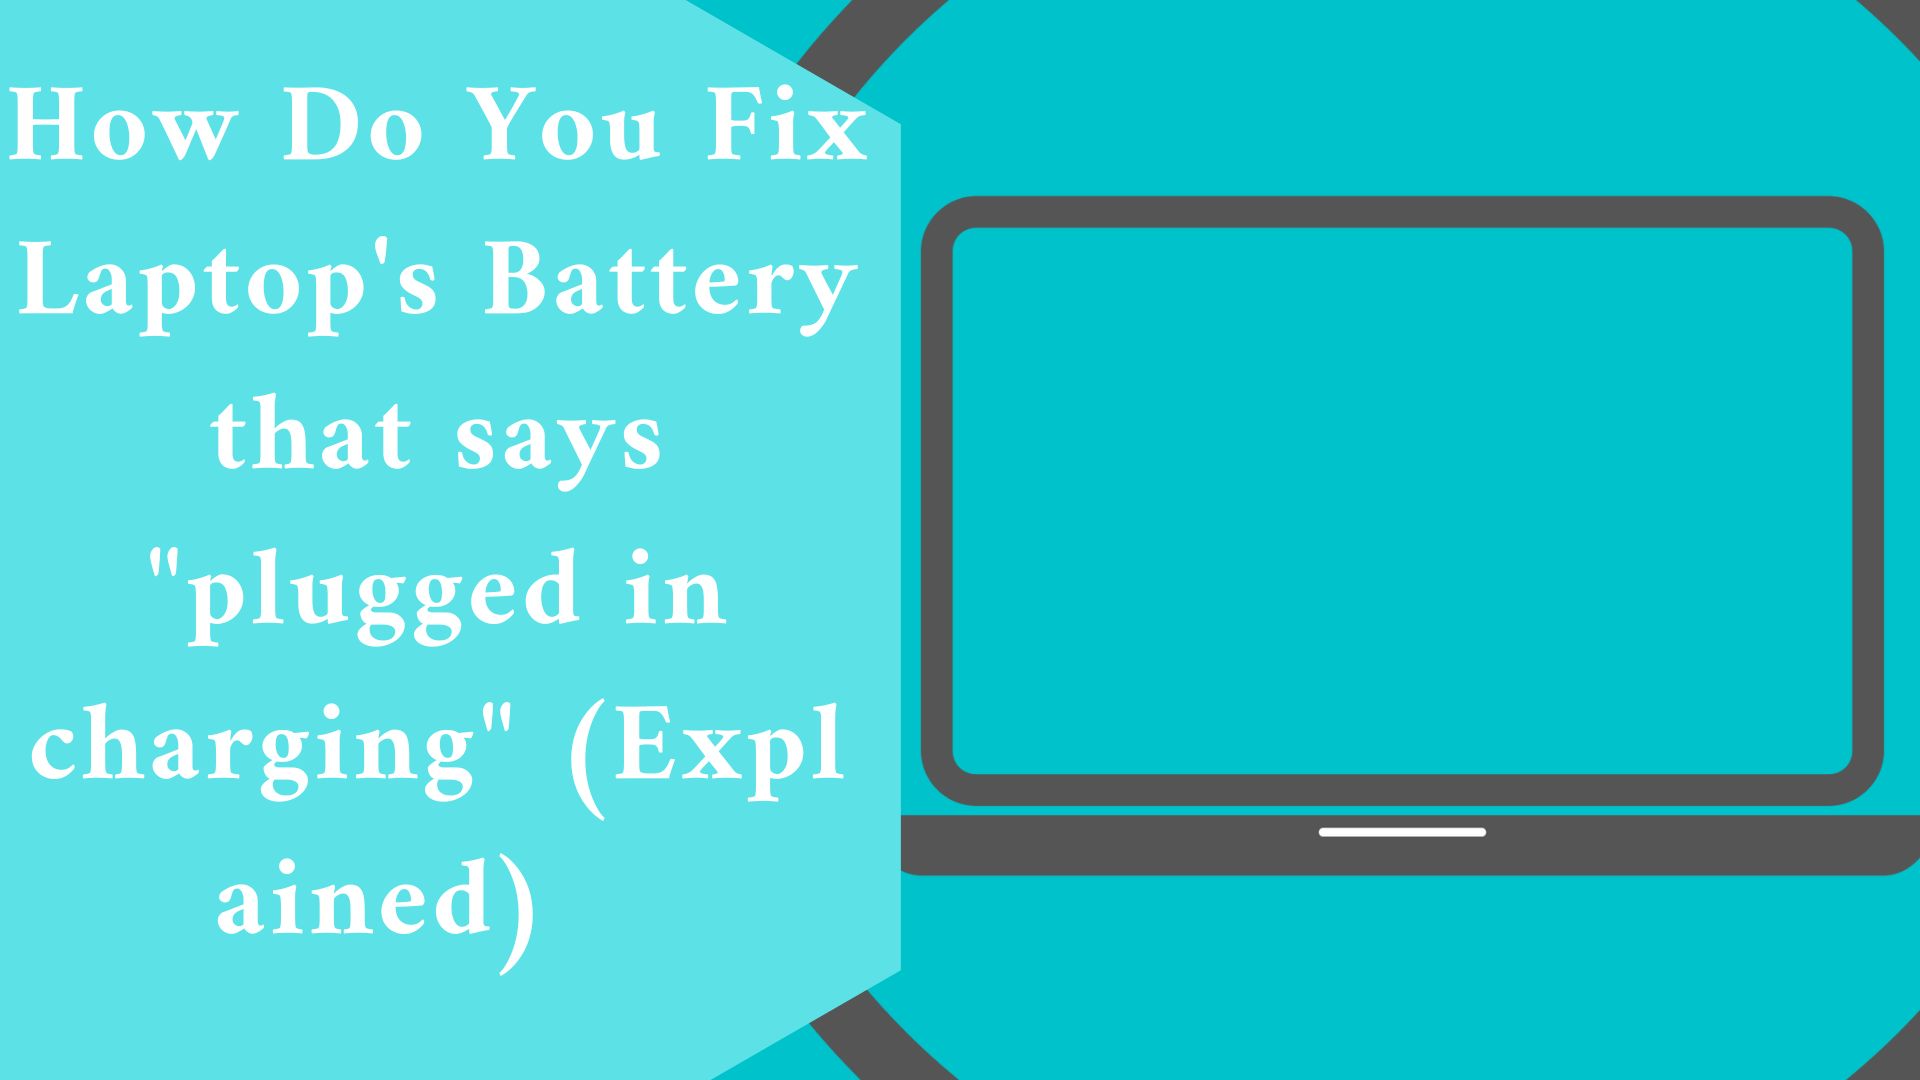 How Do You Fix Laptop's Battery that says "plugged in charging" (Explained)  